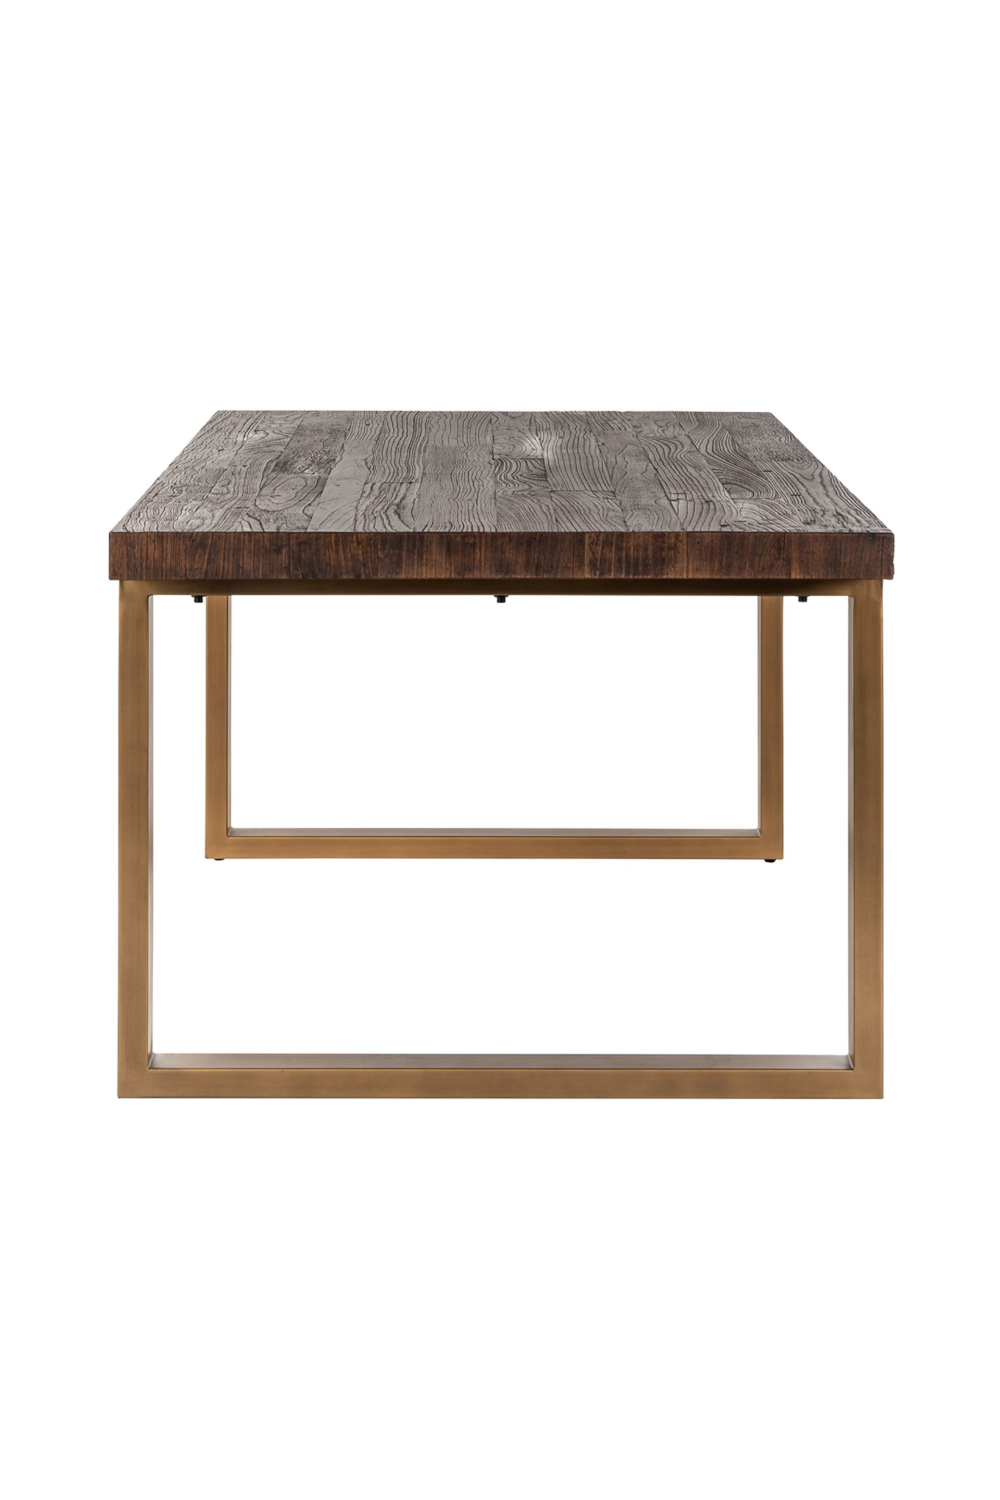 Recycled Elm Gold Base Dining Table | OROA Cromford Mill | OROA.com